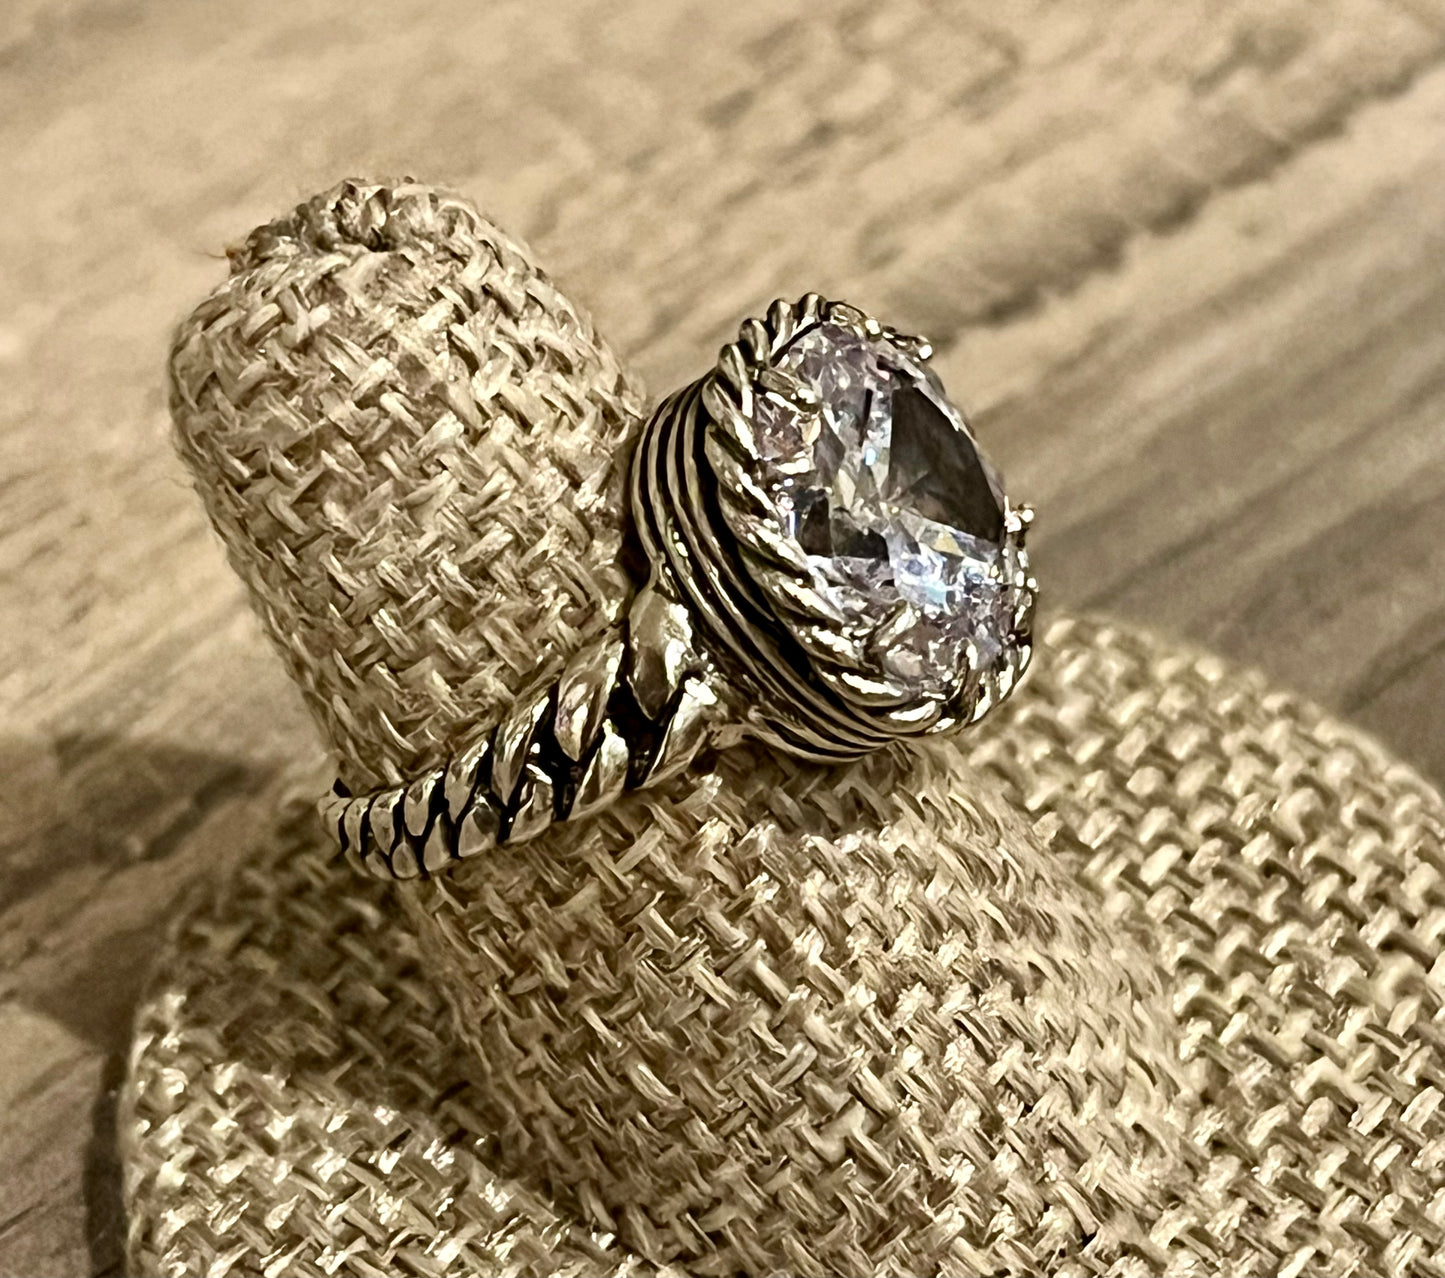 Large Solitaire Ring